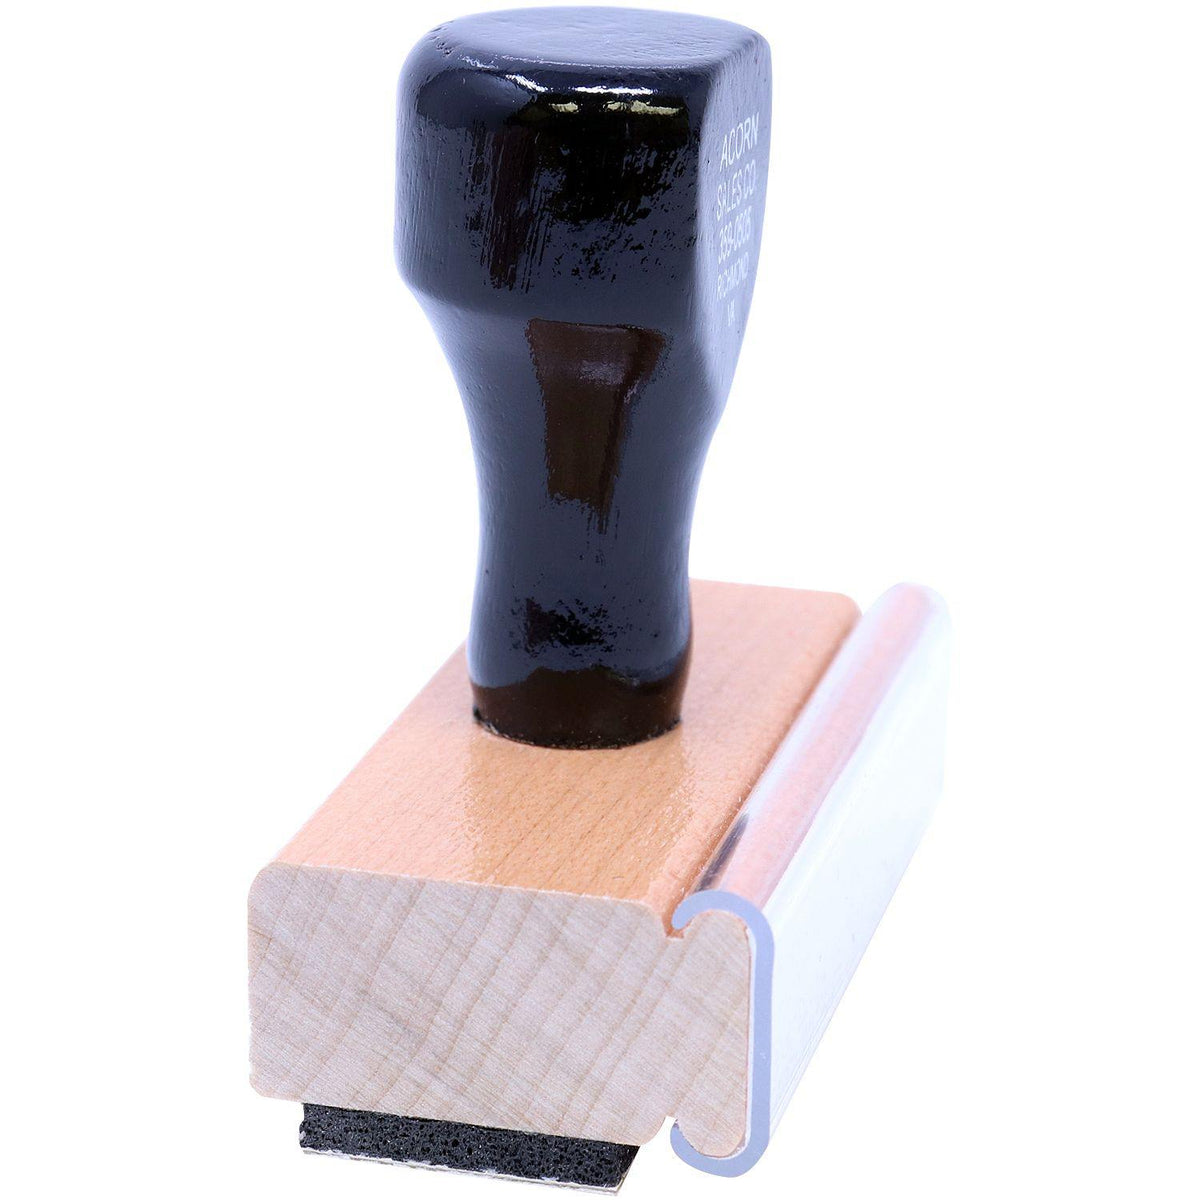 Side View of Bold Red Credit Rubber Stamp at an Angle